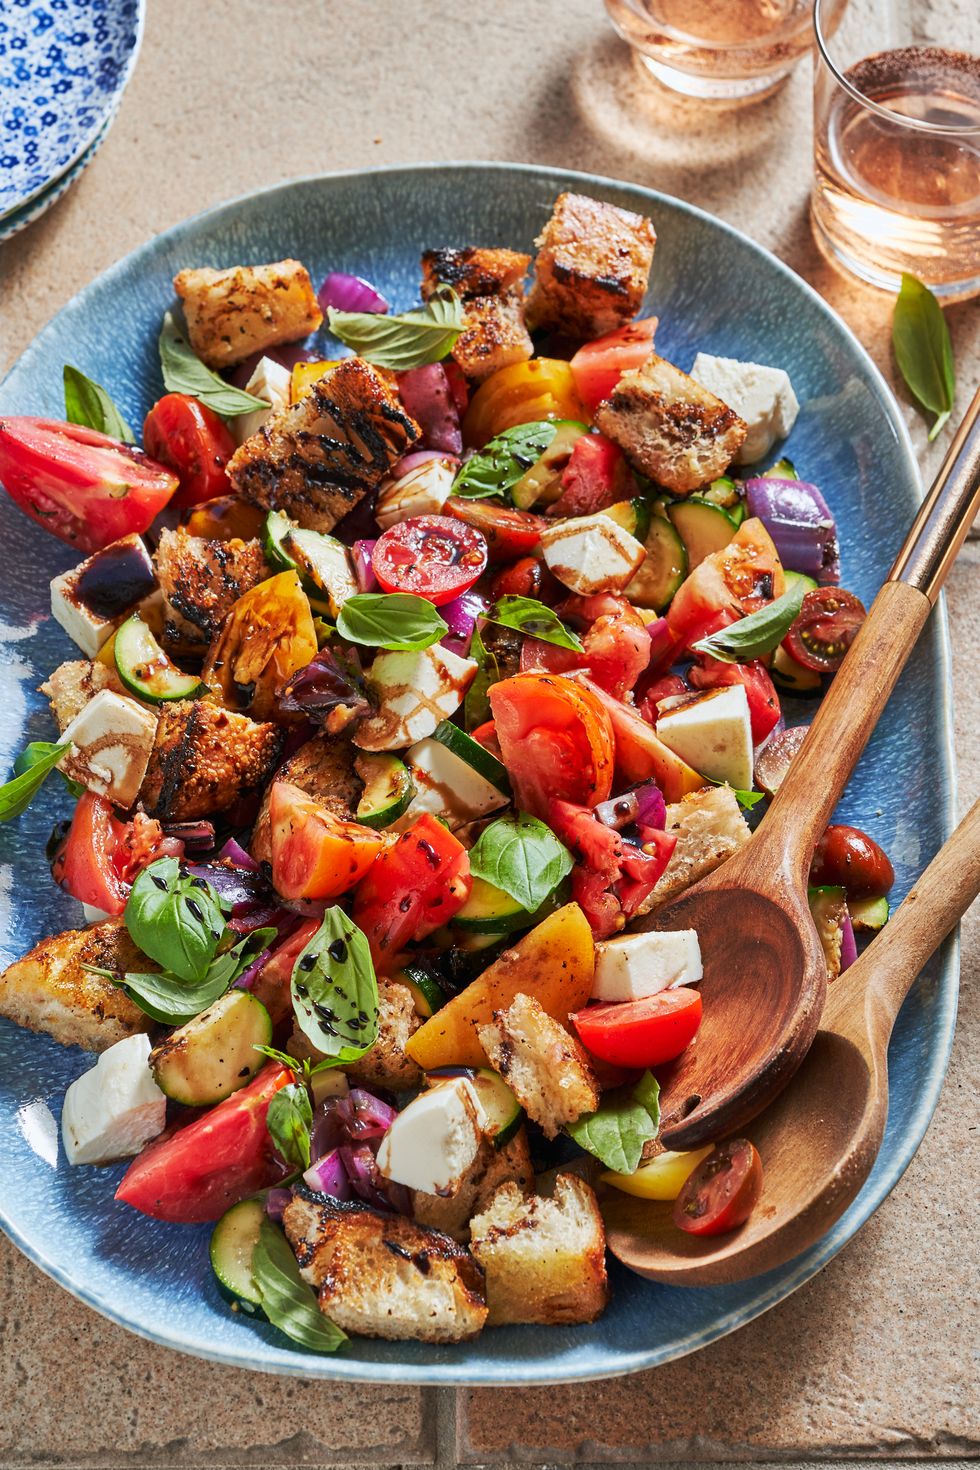 https://hips.hearstapps.com/hmg-prod/images/grilled-panzanella-salad-1650382799.jpg?crop=0.9997808459346922xw:1xh;center,top&resize=980:*